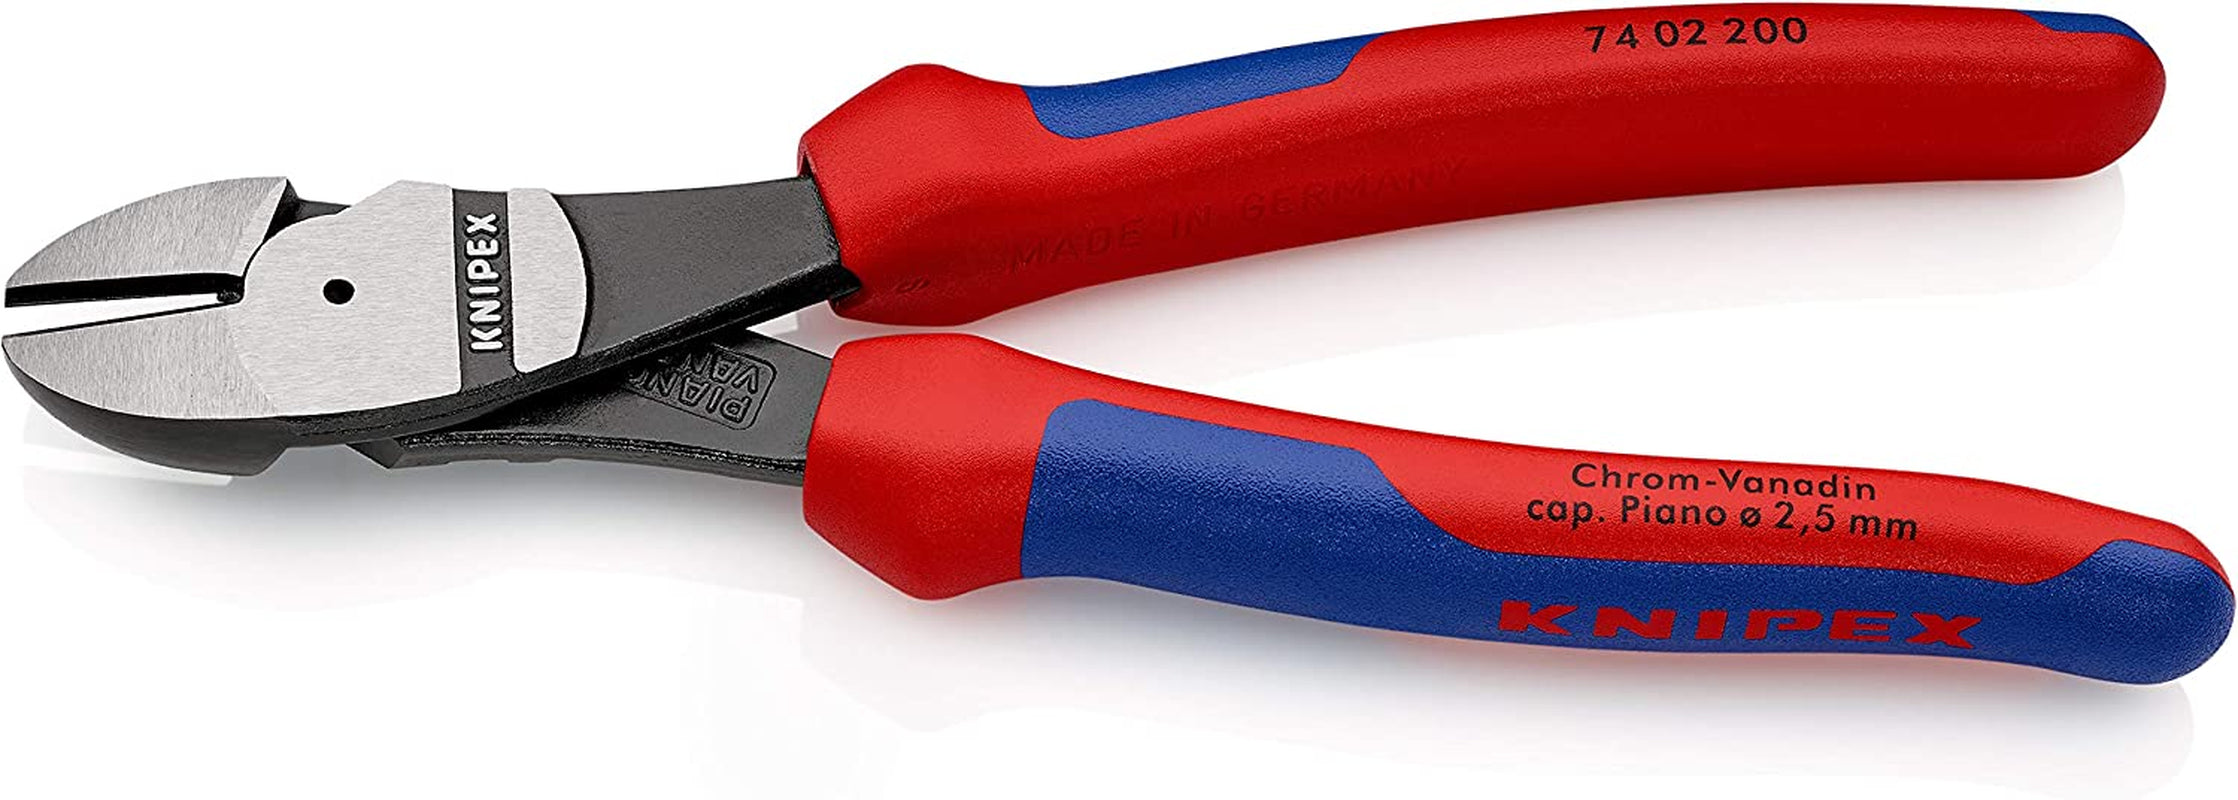 KNIPEX Tools, Knipex 7402200 8-Inch High Leverage Diagonal Cutters - Comfort Grip